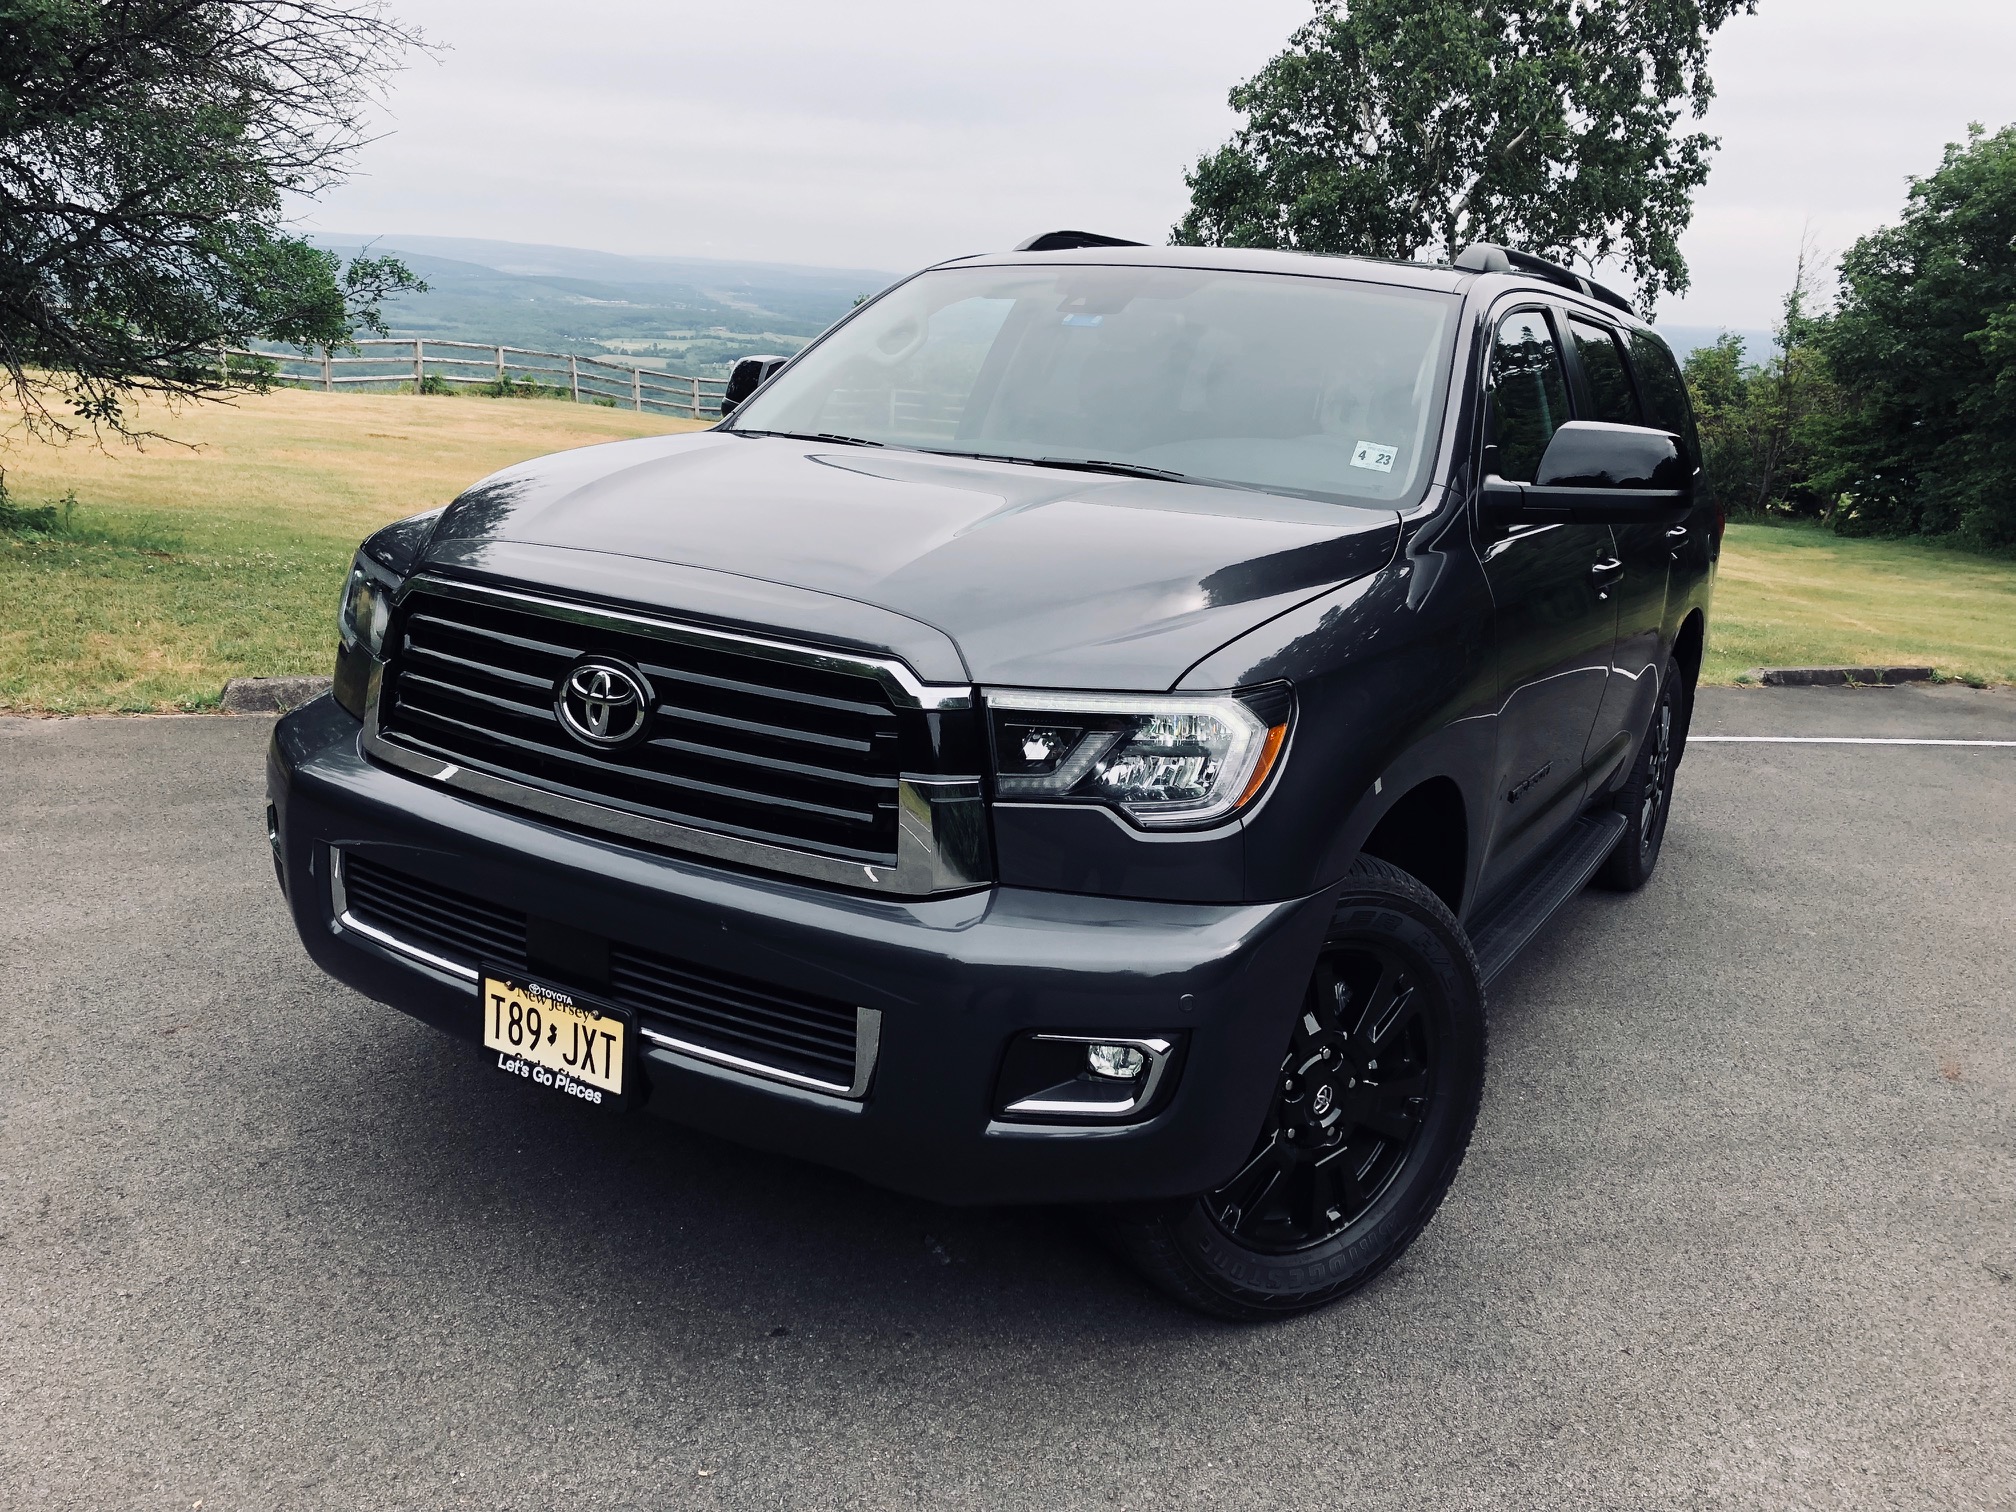 Toyota Sequoia TRD Sport 2018 Review By Auto Critic Steve Hammes